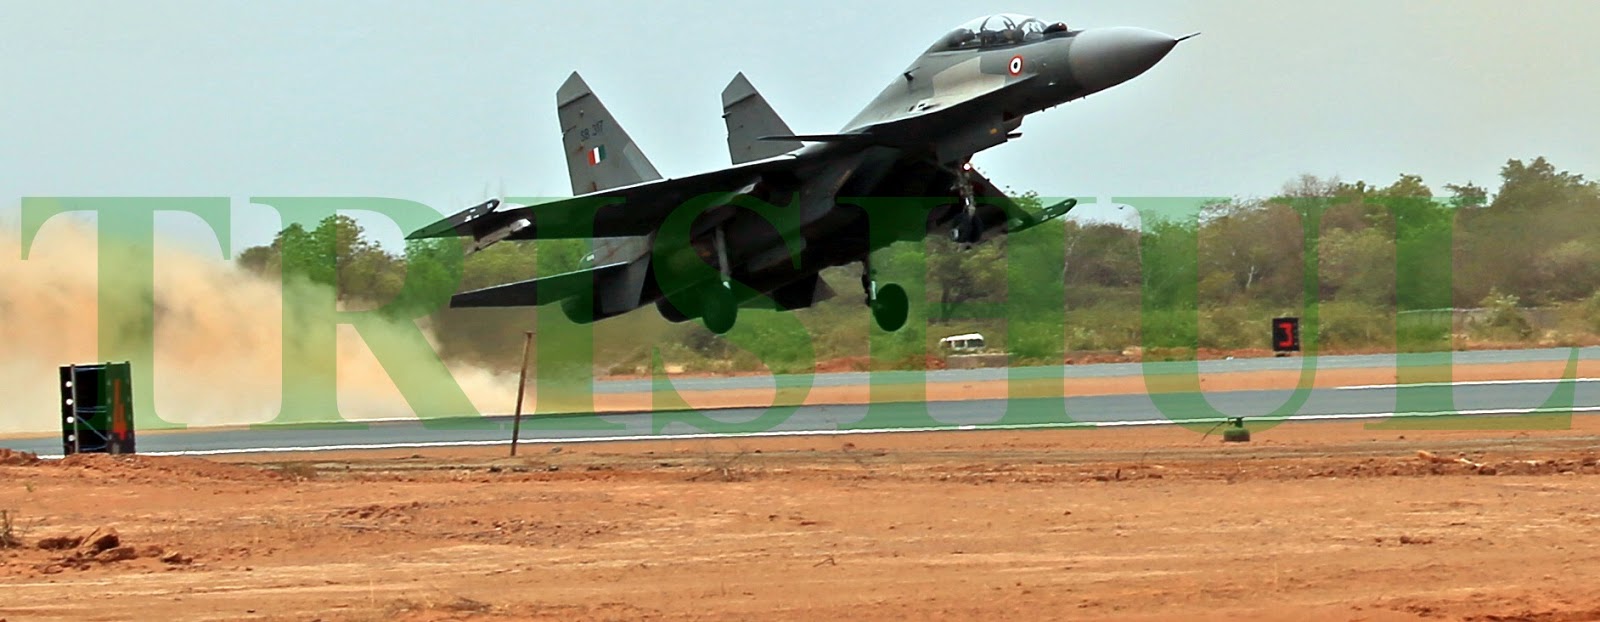 Su-30MKI+taking+off+from+the+Thanjavuram+Air+Force+Station+on+May+27,+2013.jpg